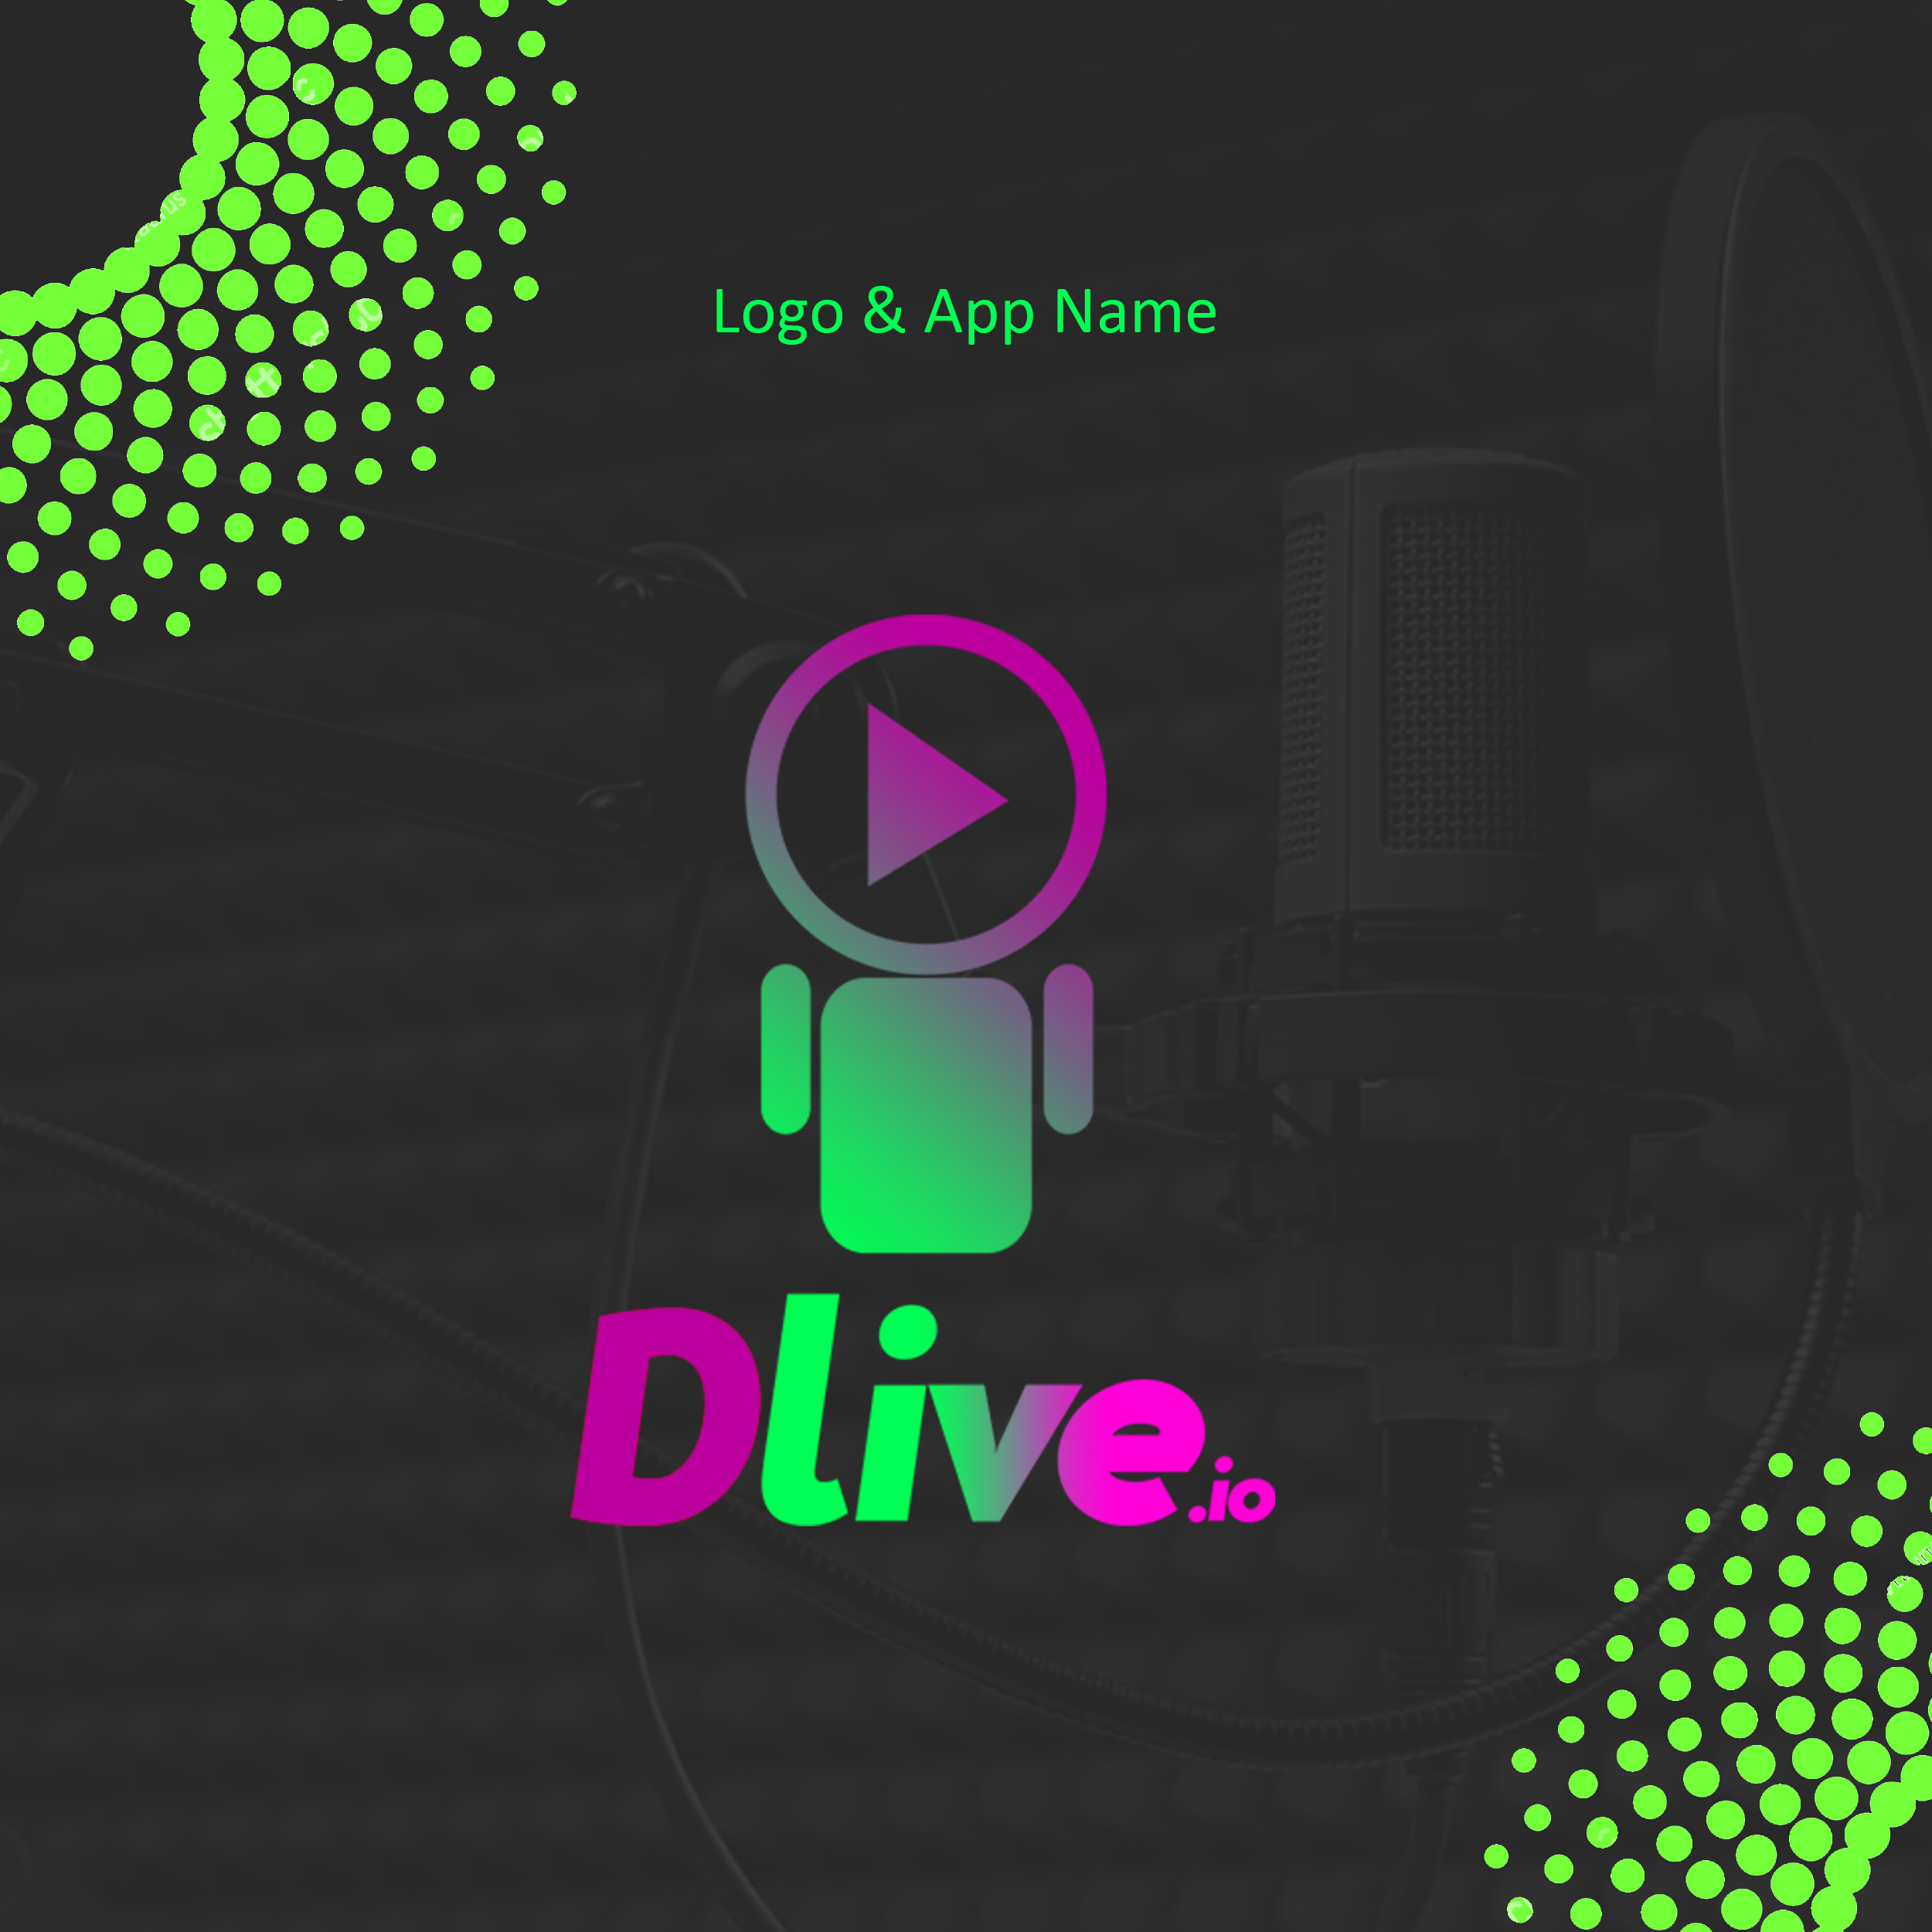 New Dlive Logo And Icon For First Decentralized Live Video Streaming Platform For Steemit Steemit